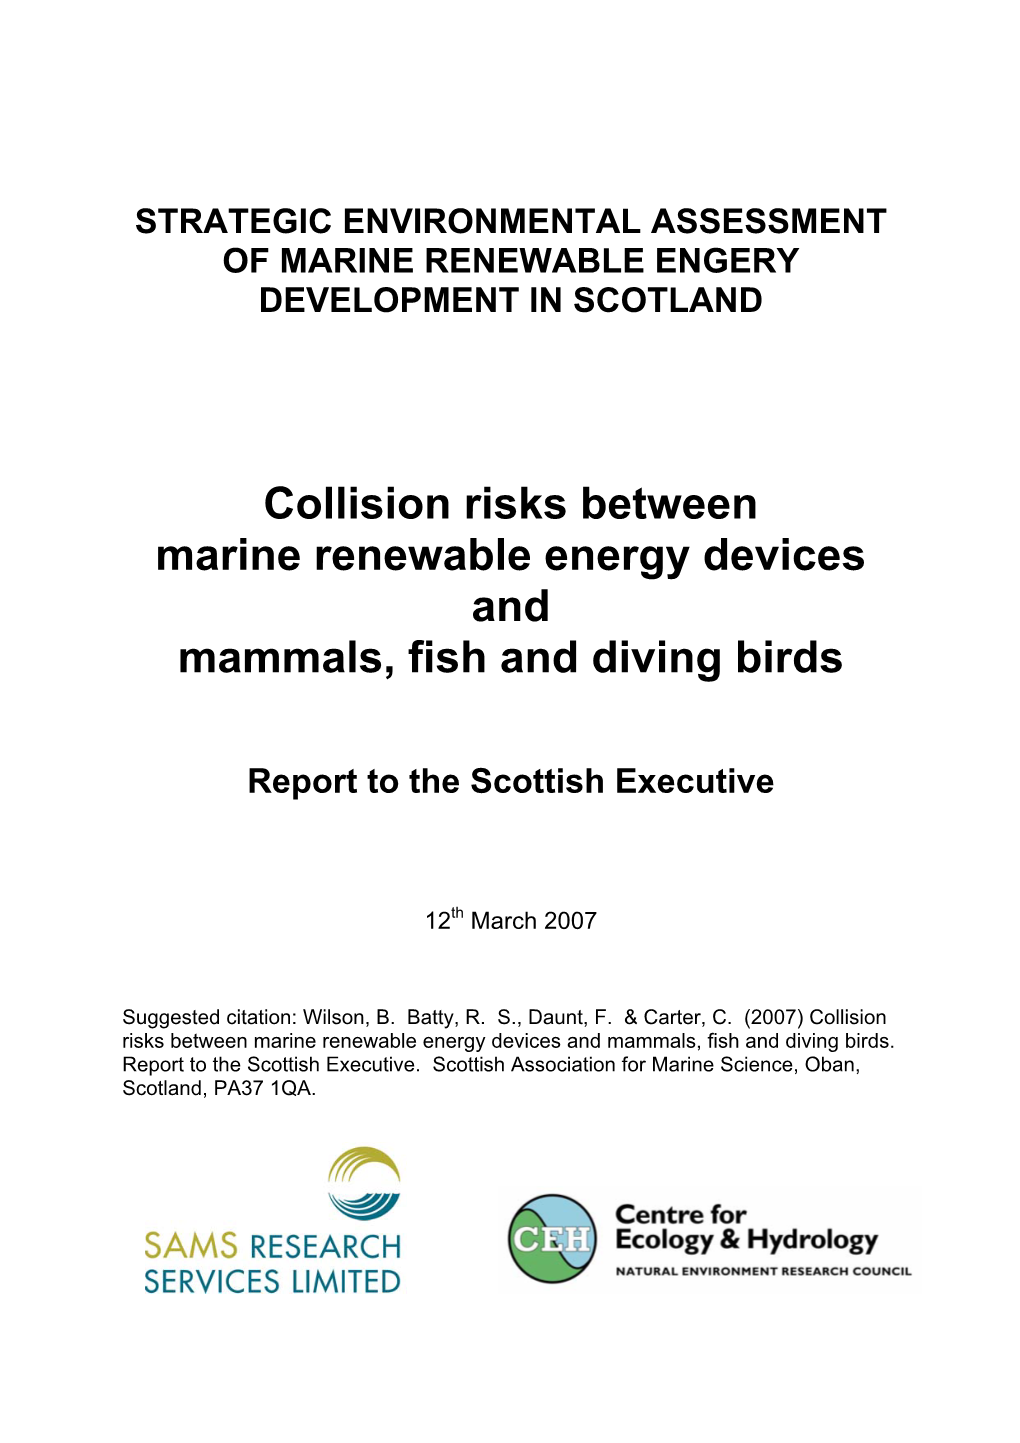 Collision Risks Between Marine Renewable Energy Devices and Mammals, Fish and Diving Birds